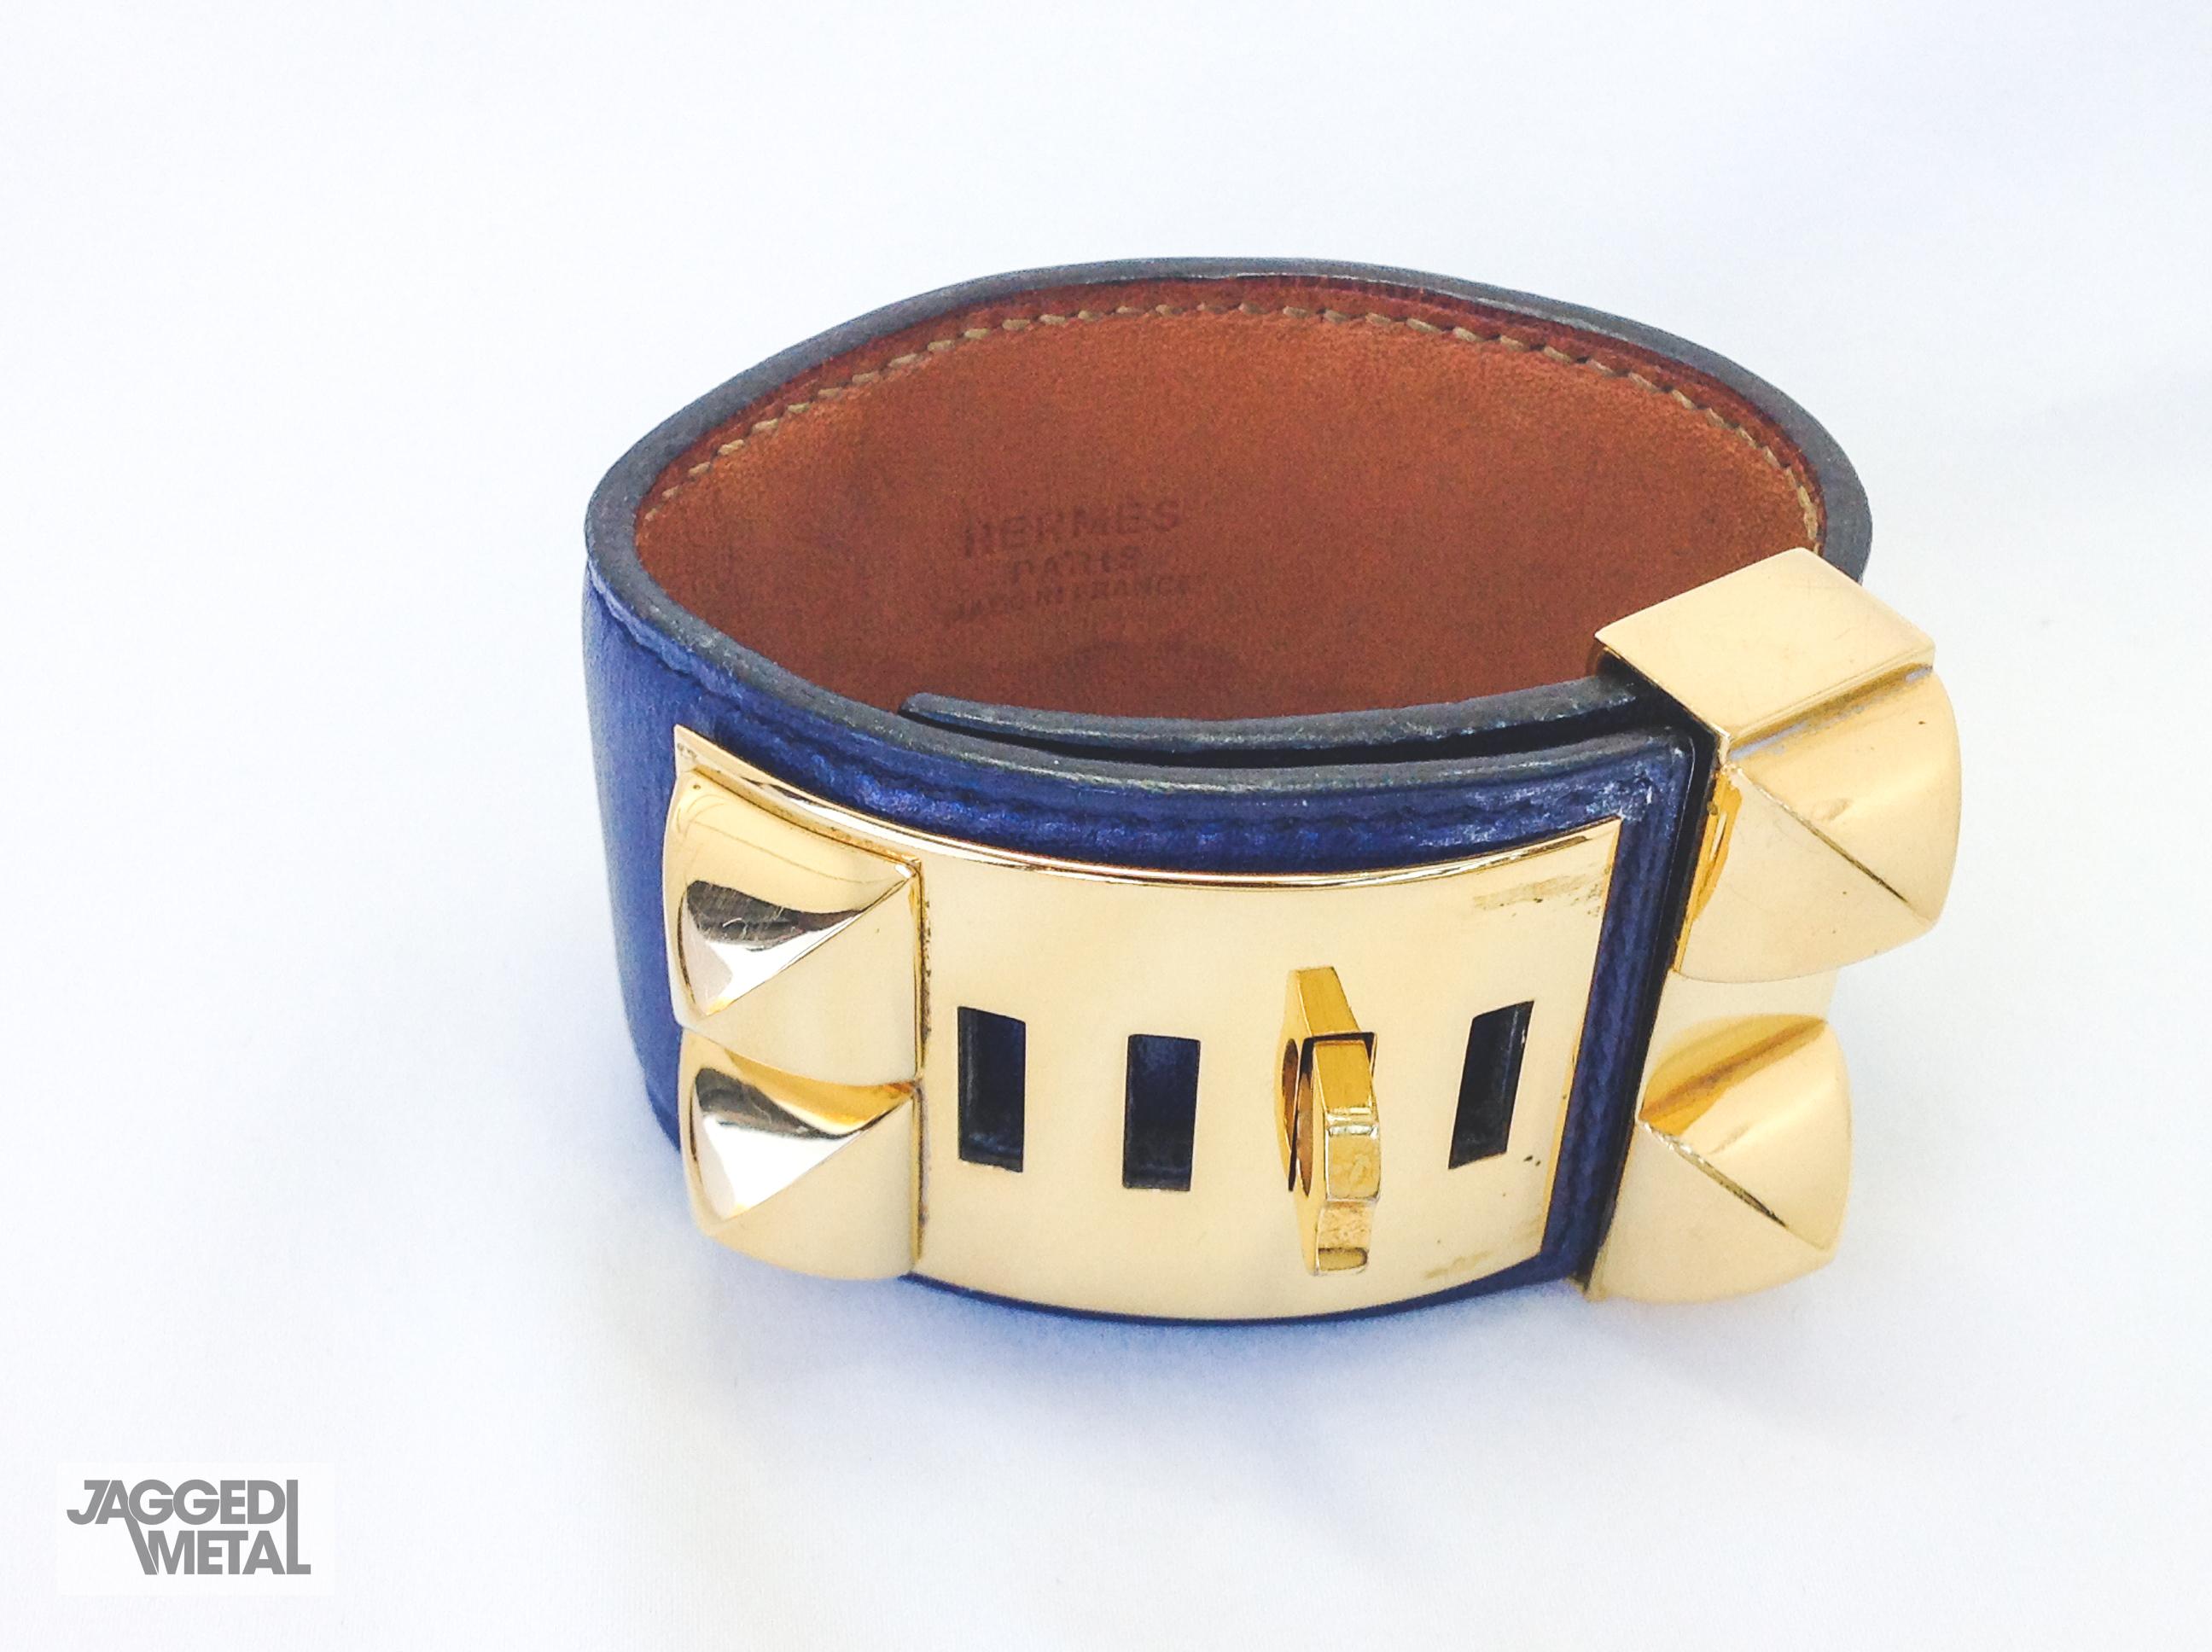 Vintage HERMÈS Collier De Chien Cuff Bracelet 

Blue leather with gold plated studs and ring. Adjustable slide lock closure. 

Size & Fit
-length 21 cms, width 4 cms 

Authenticity & Condition
Fully examined and authenticated by experts. This is a